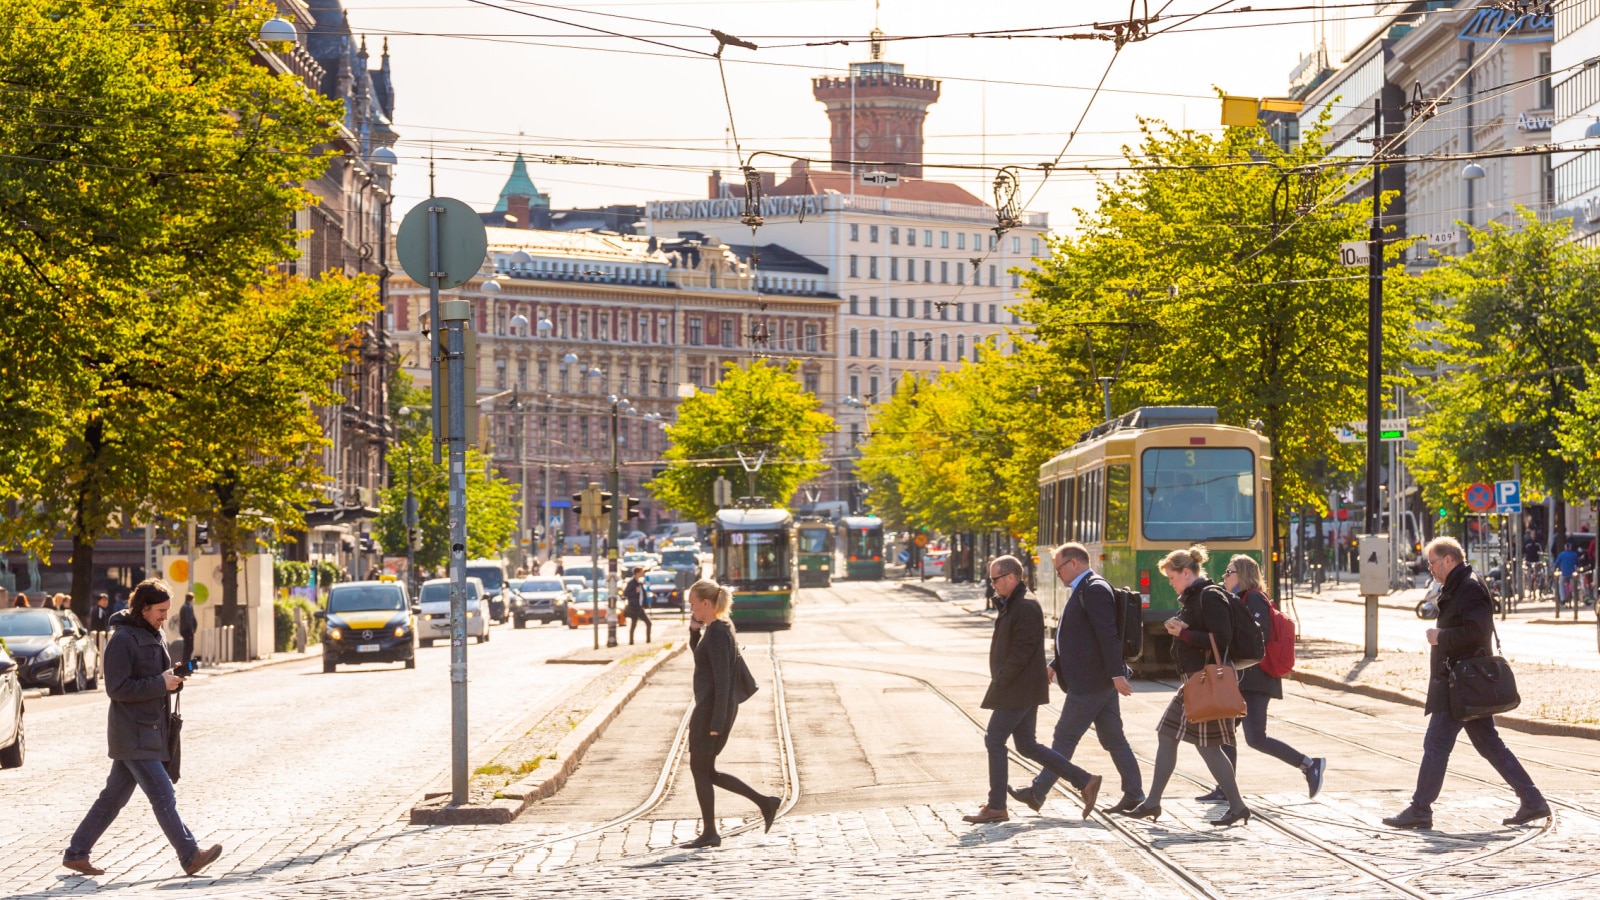 Helsinki,Finland- September 19th 2019: people and tram on street in Helsinki Old Town.Helsinki is the capital city and most populous municipality of Finland